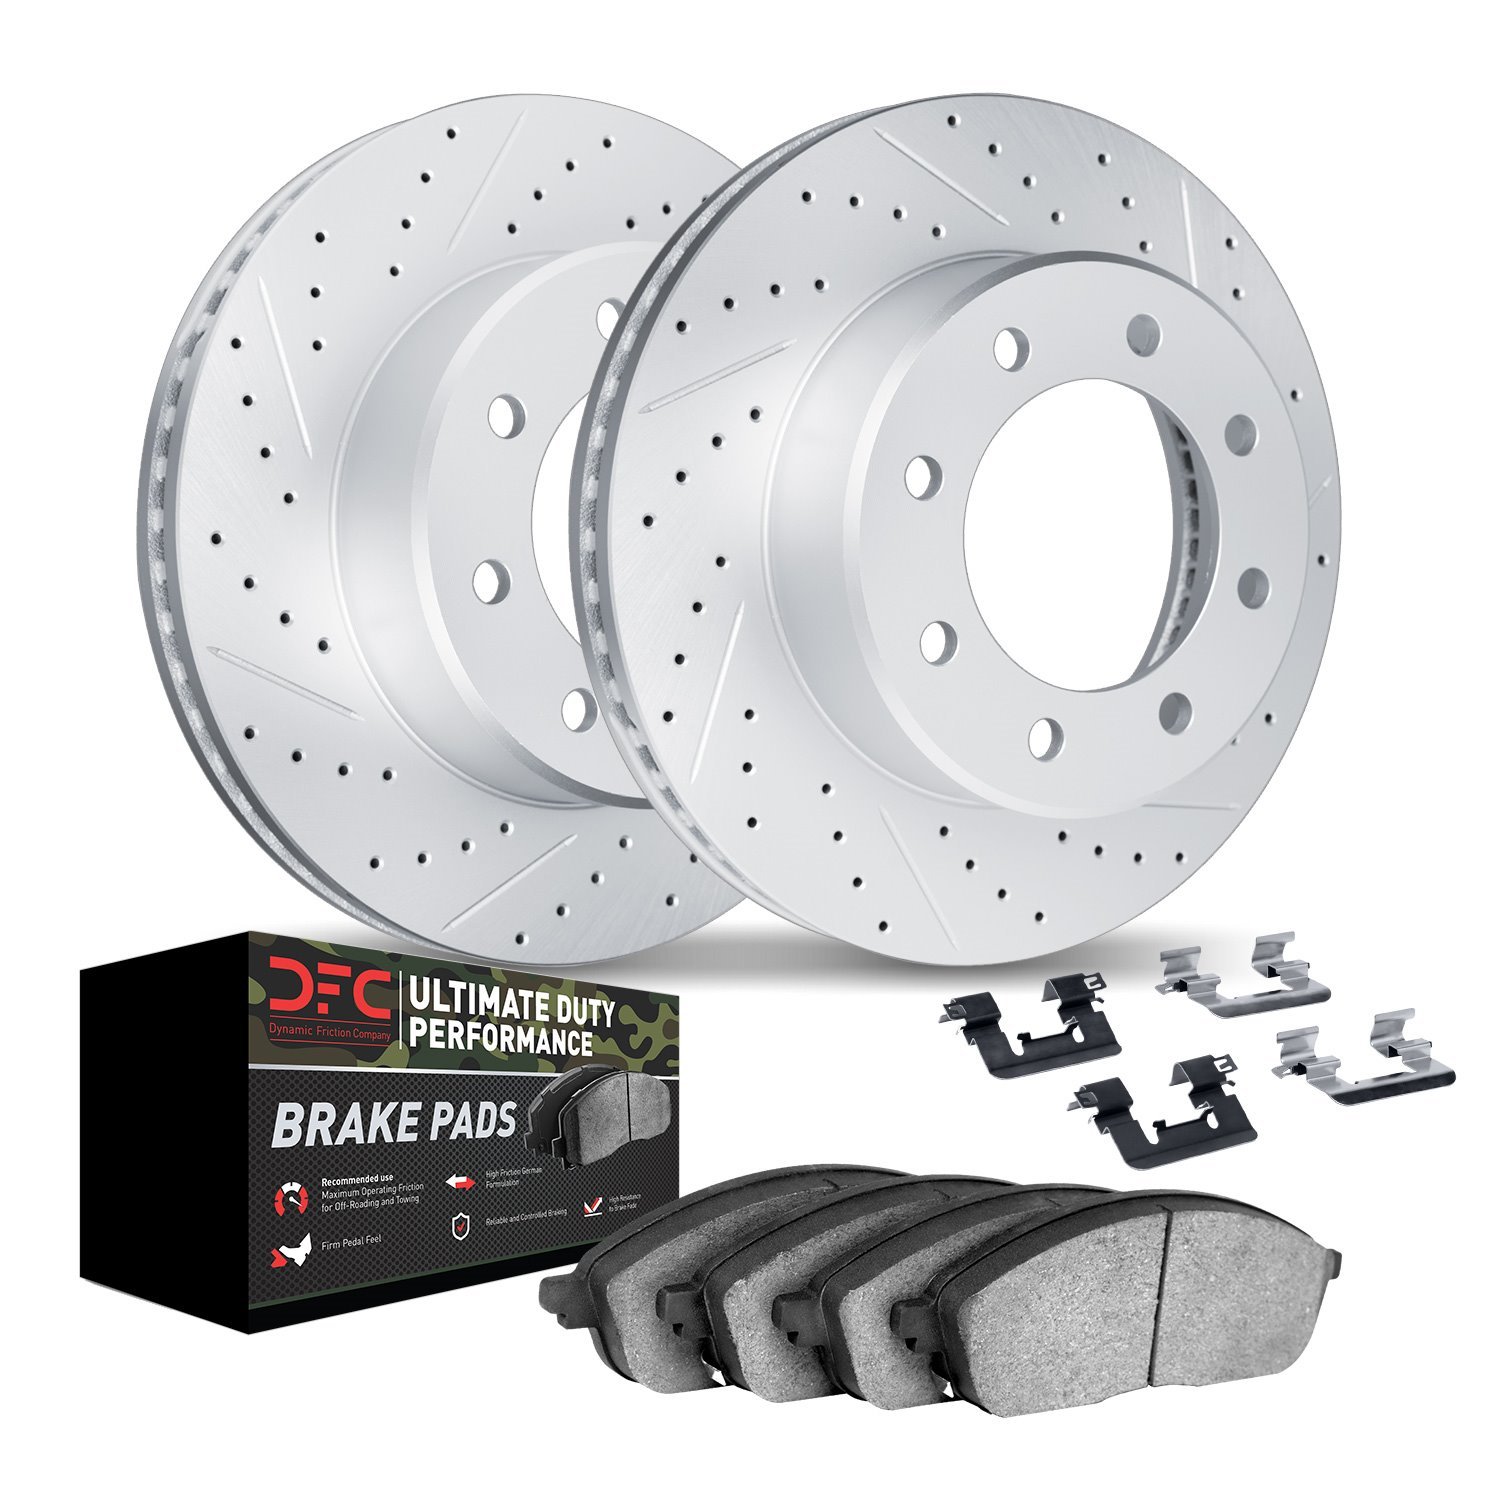 2412-54061 Geoperformance Drilled/Slotted Brake Rotors with Ultimate-Duty Brake Pads Kit & Hardware, 2005-2007 Ford/Lincoln/Merc